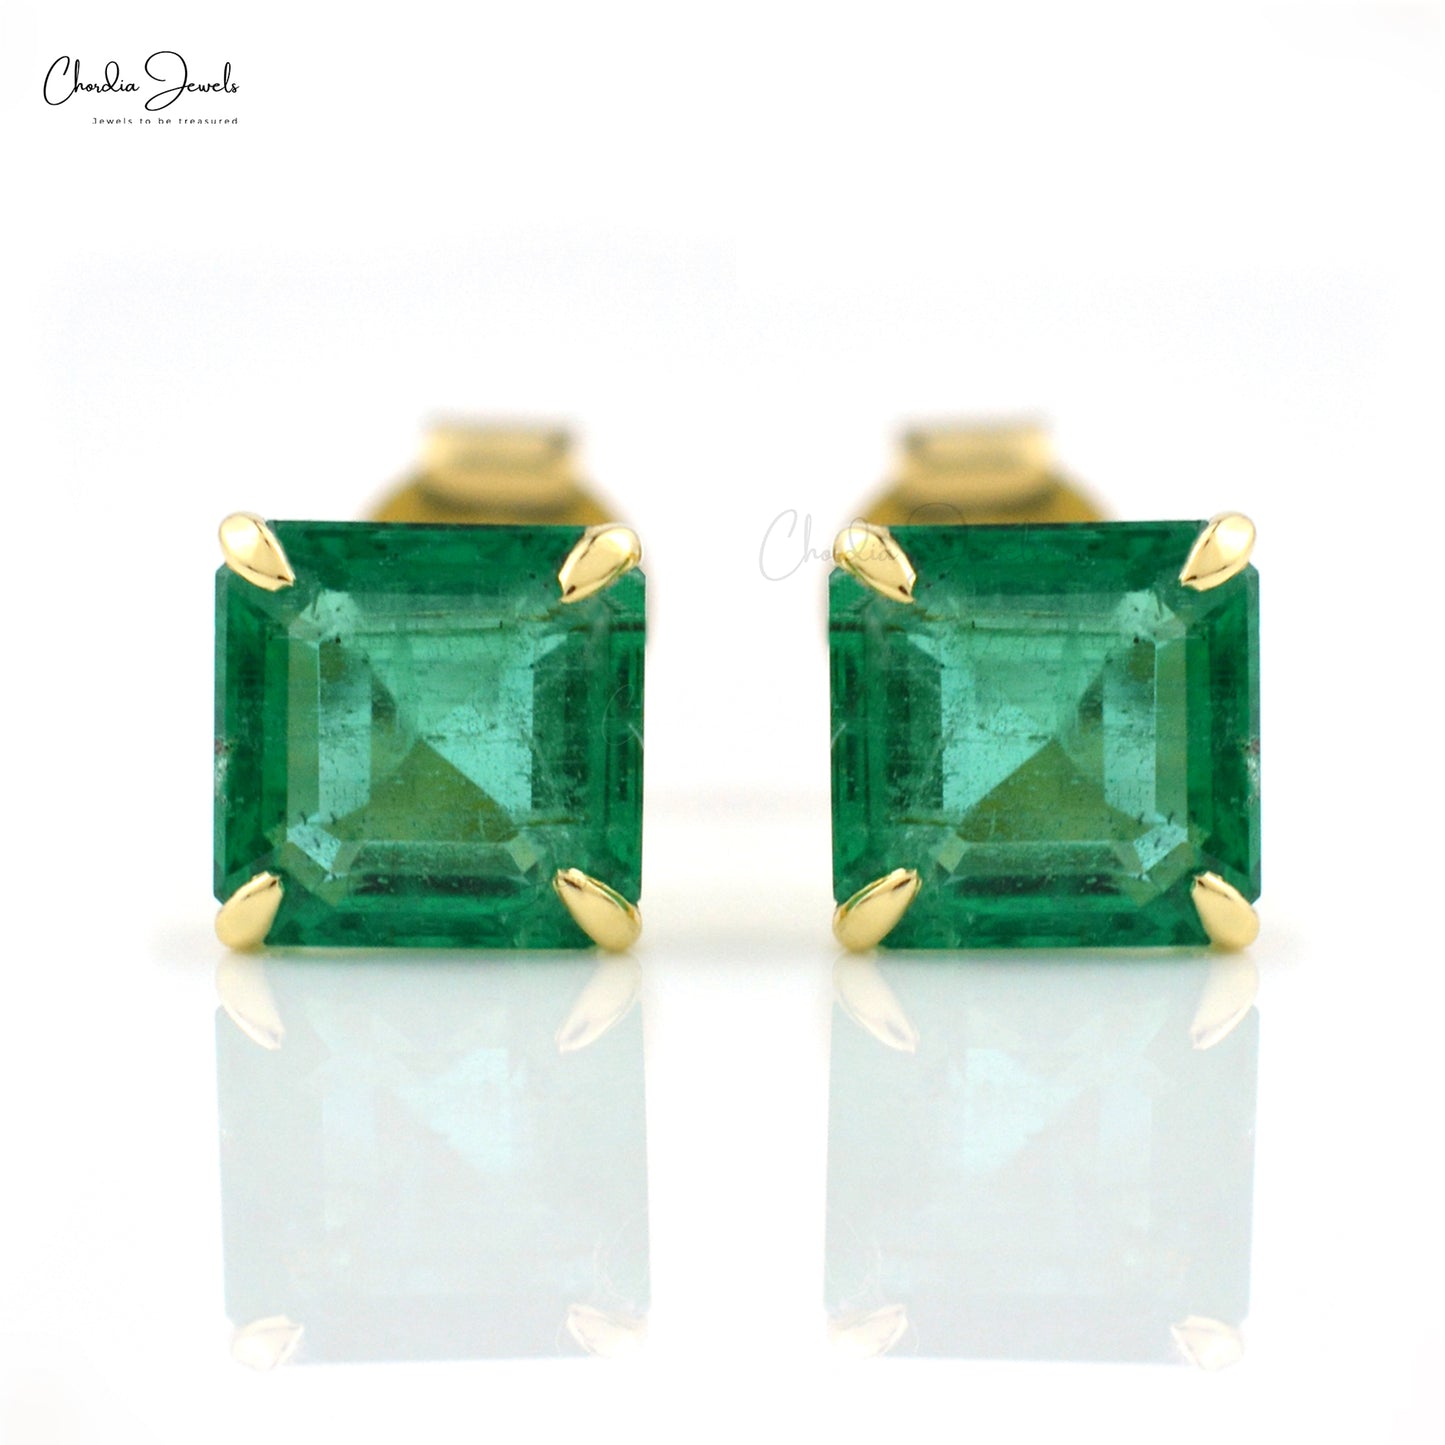 Let this emerald solitaire stud earrings be your signature.